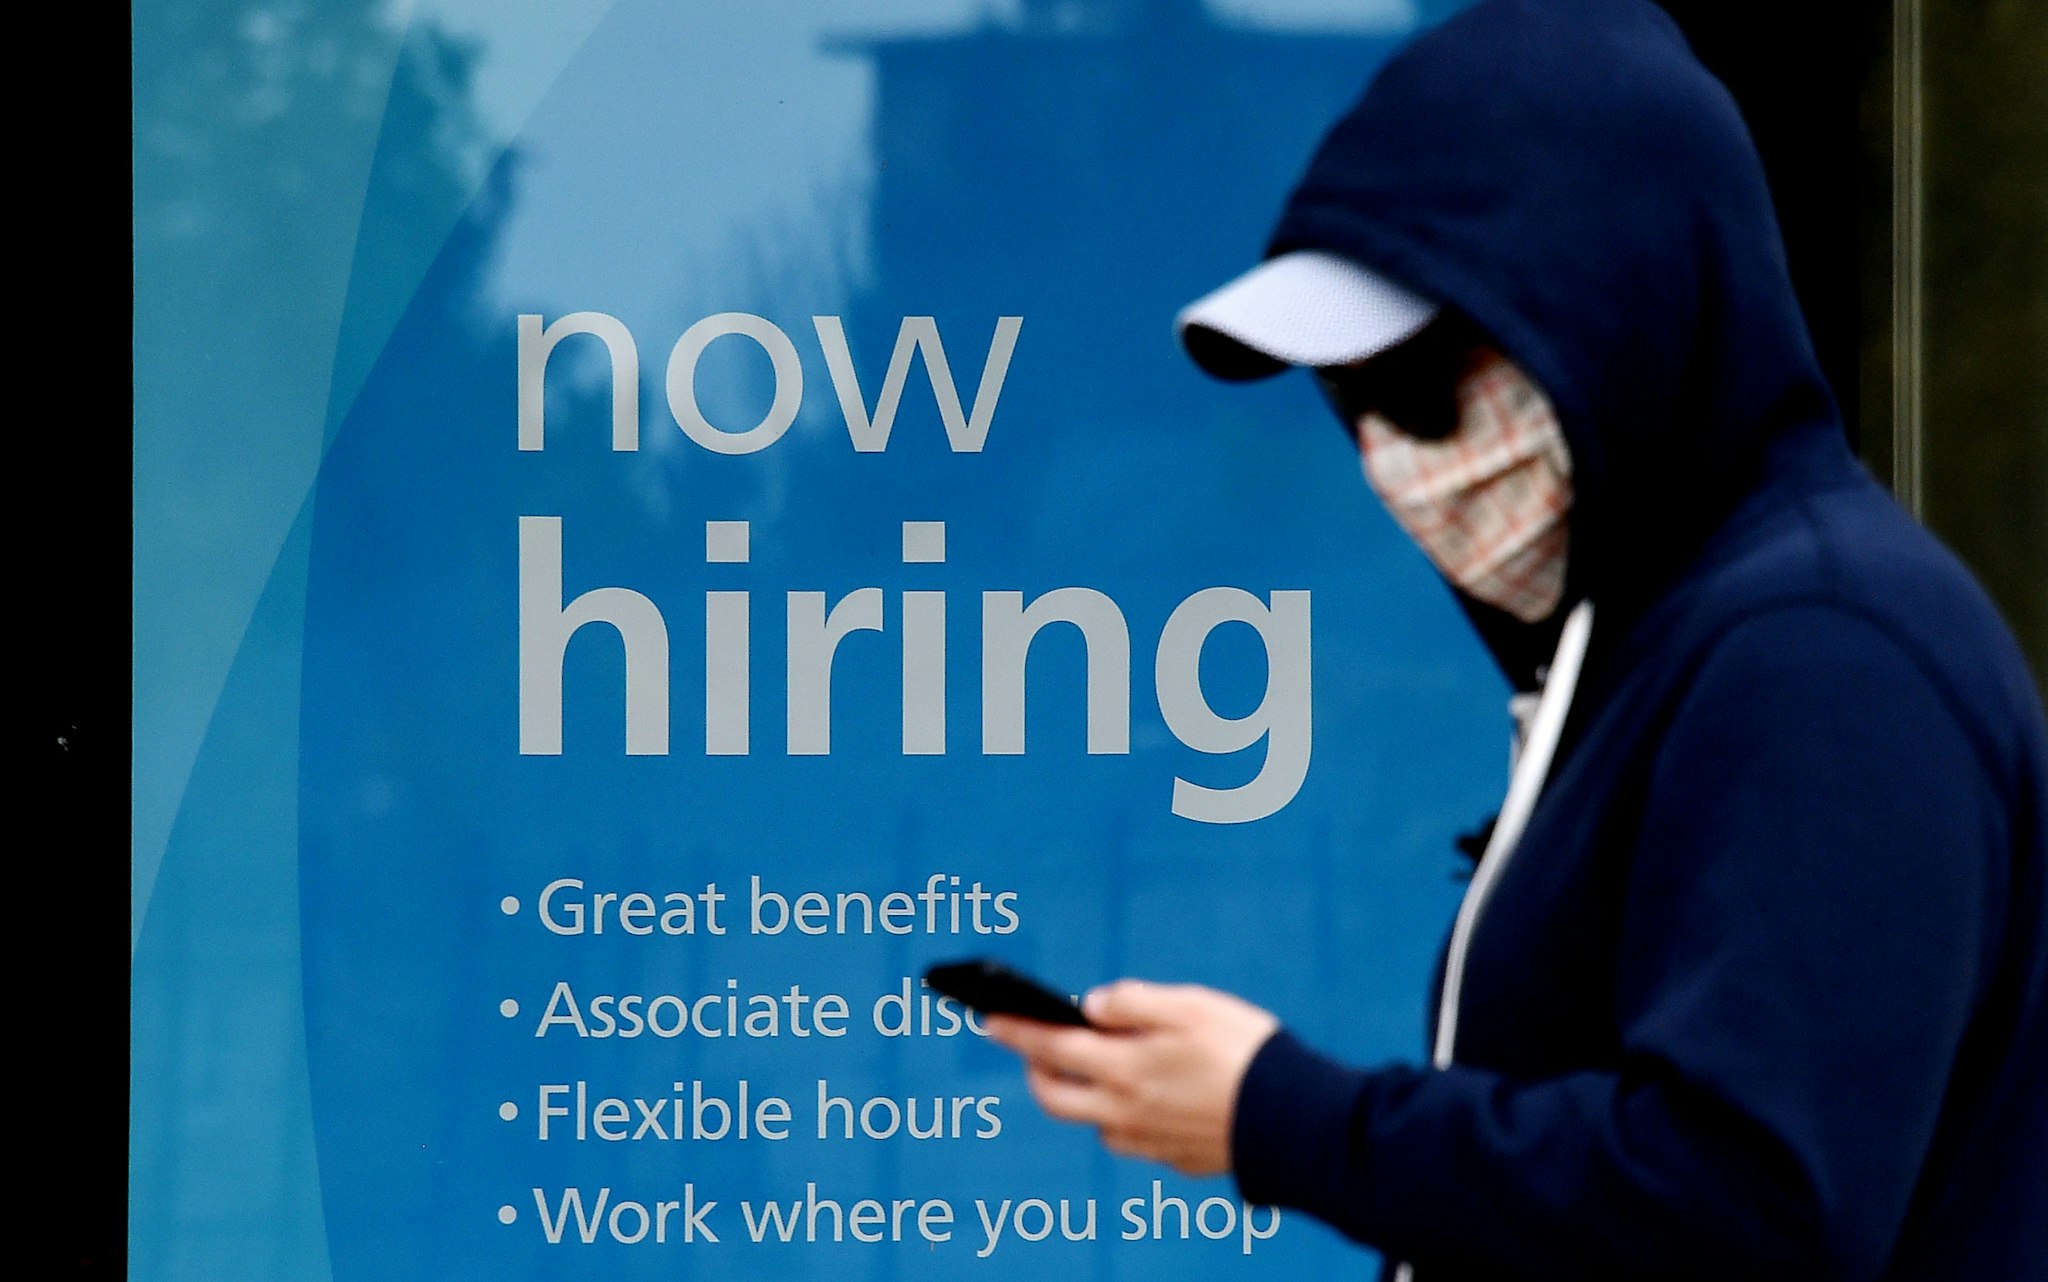 A man wearing a face mask walks past a sign "Now Hiring" in front of a store amid the coronavirus pandemic on May 14, 2020 in Arlington, Virginia. - Another 3 million people filed initial unemployment claims last week on a seasonally adjusted basis, according to the Department of Labor. (Photo by Olivier DOULIERY / AFP) (Photo by OLIVIER DOULIERY/AFP via Getty Images)